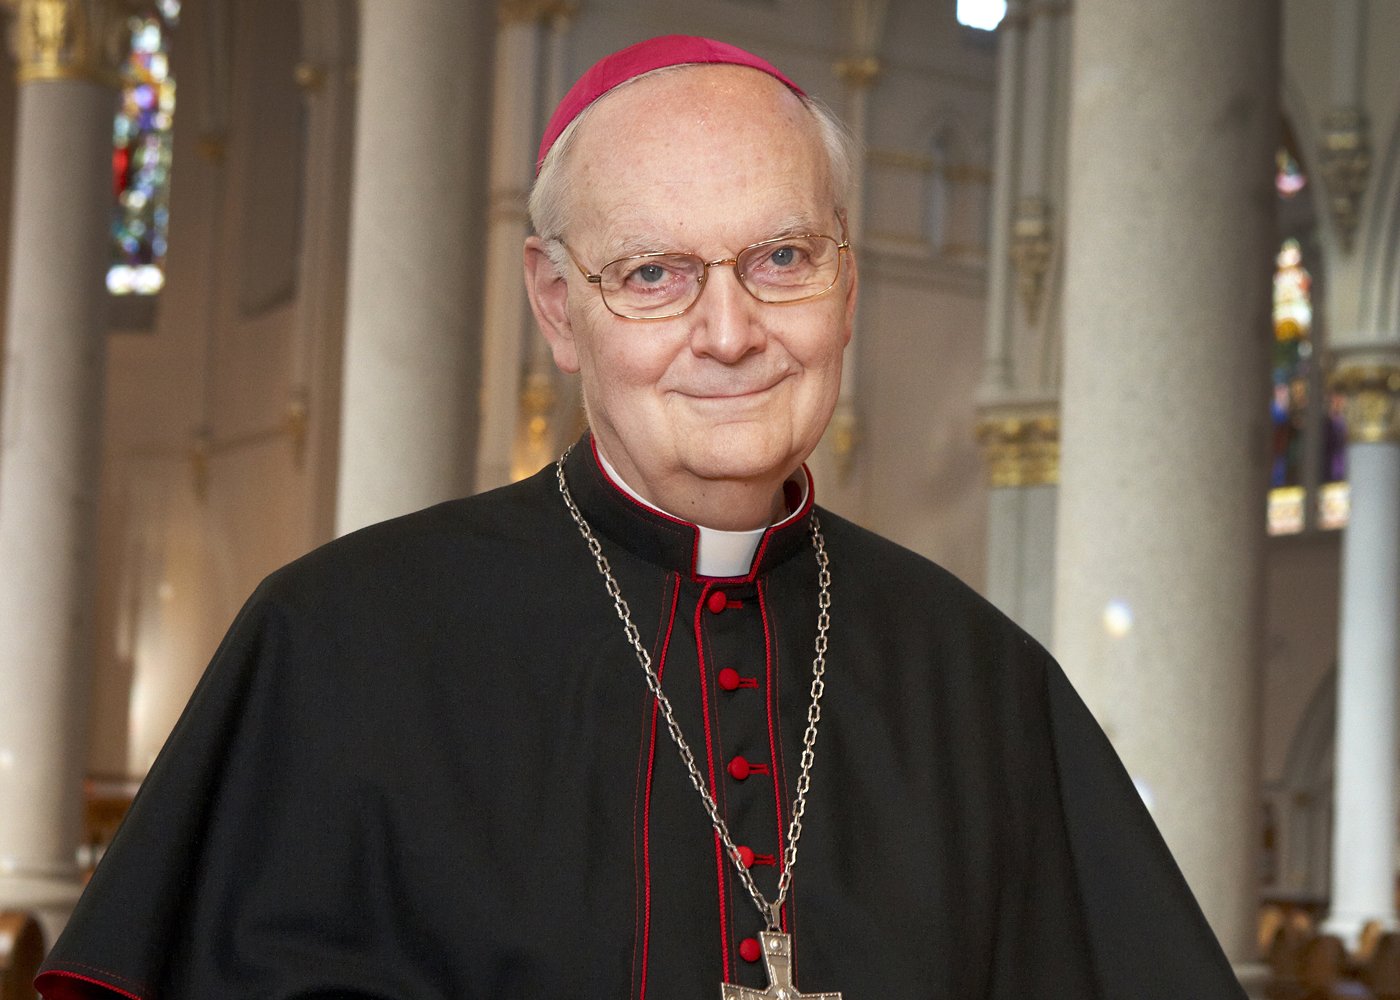 Retired Bishop Donald W. Trautman of the Diocese of Erie, Pa., is seen in this undated photo. (CNS photo/Mark Fainstein, courtesy Diocese of Erie)